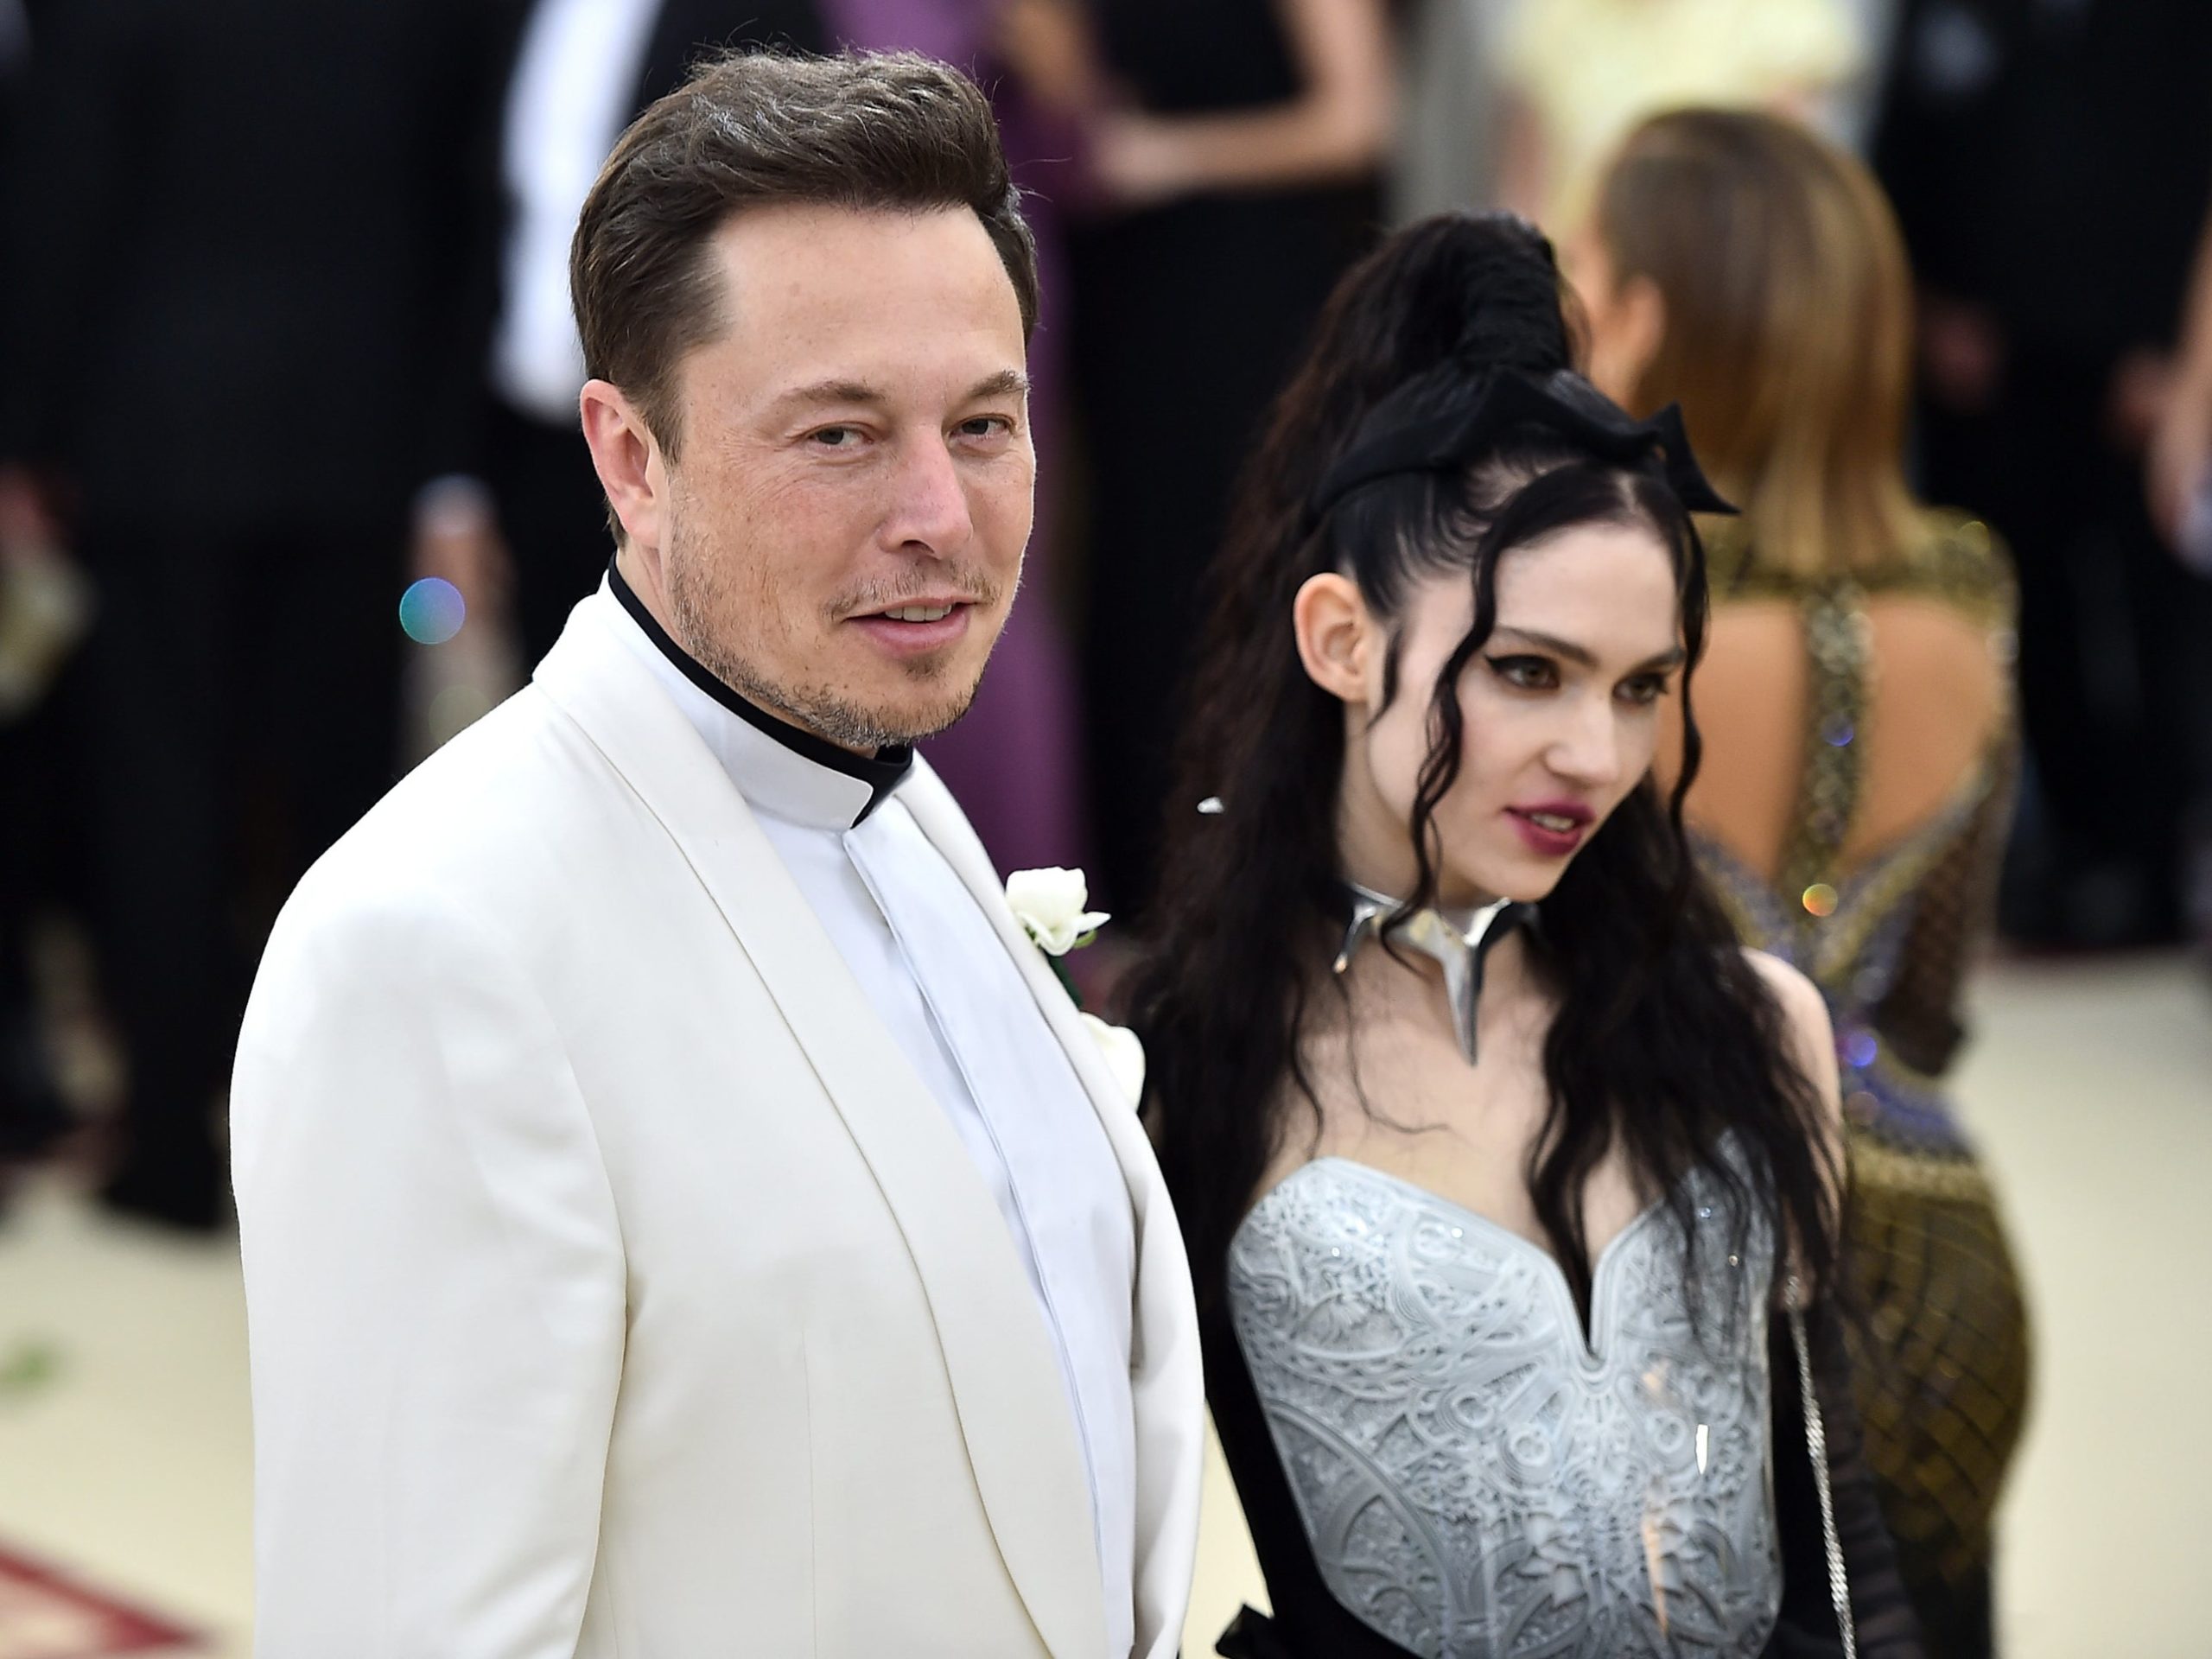 Elon Musk confirms that he and Grimes have sort of broken up after 3 years